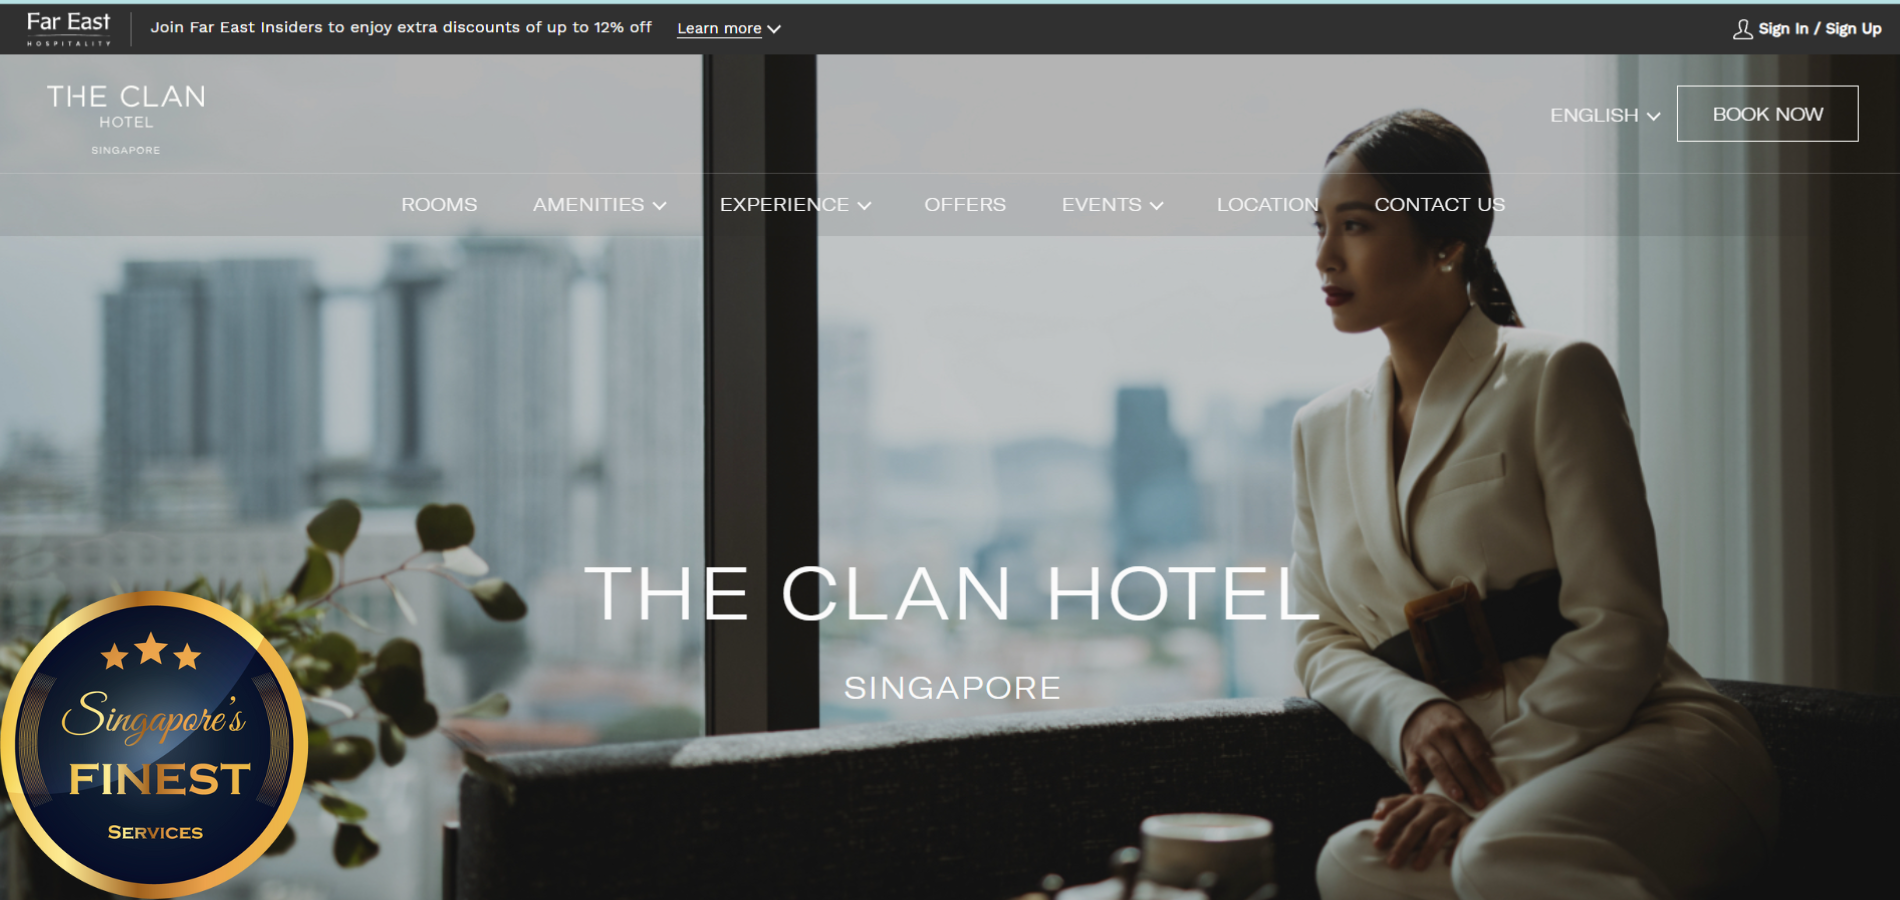 The Finest Hotels in Chinatown Singapore